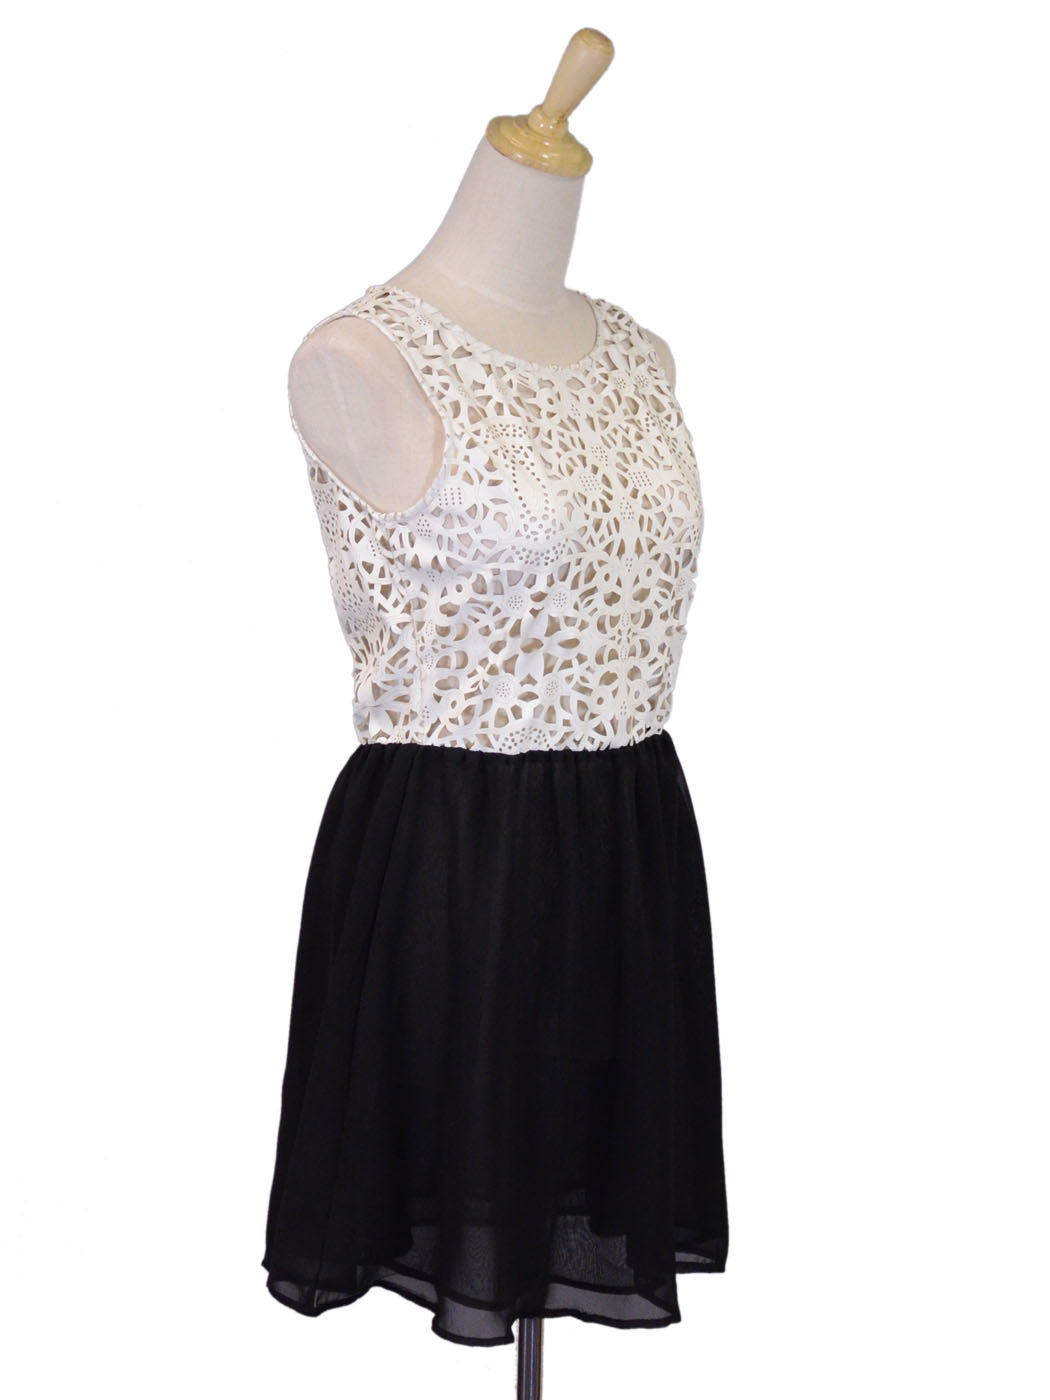 Glamorous Faux Leather Top Dress With Floral Laser Cutouts And Chiffon Skirt - ALILANG.COM